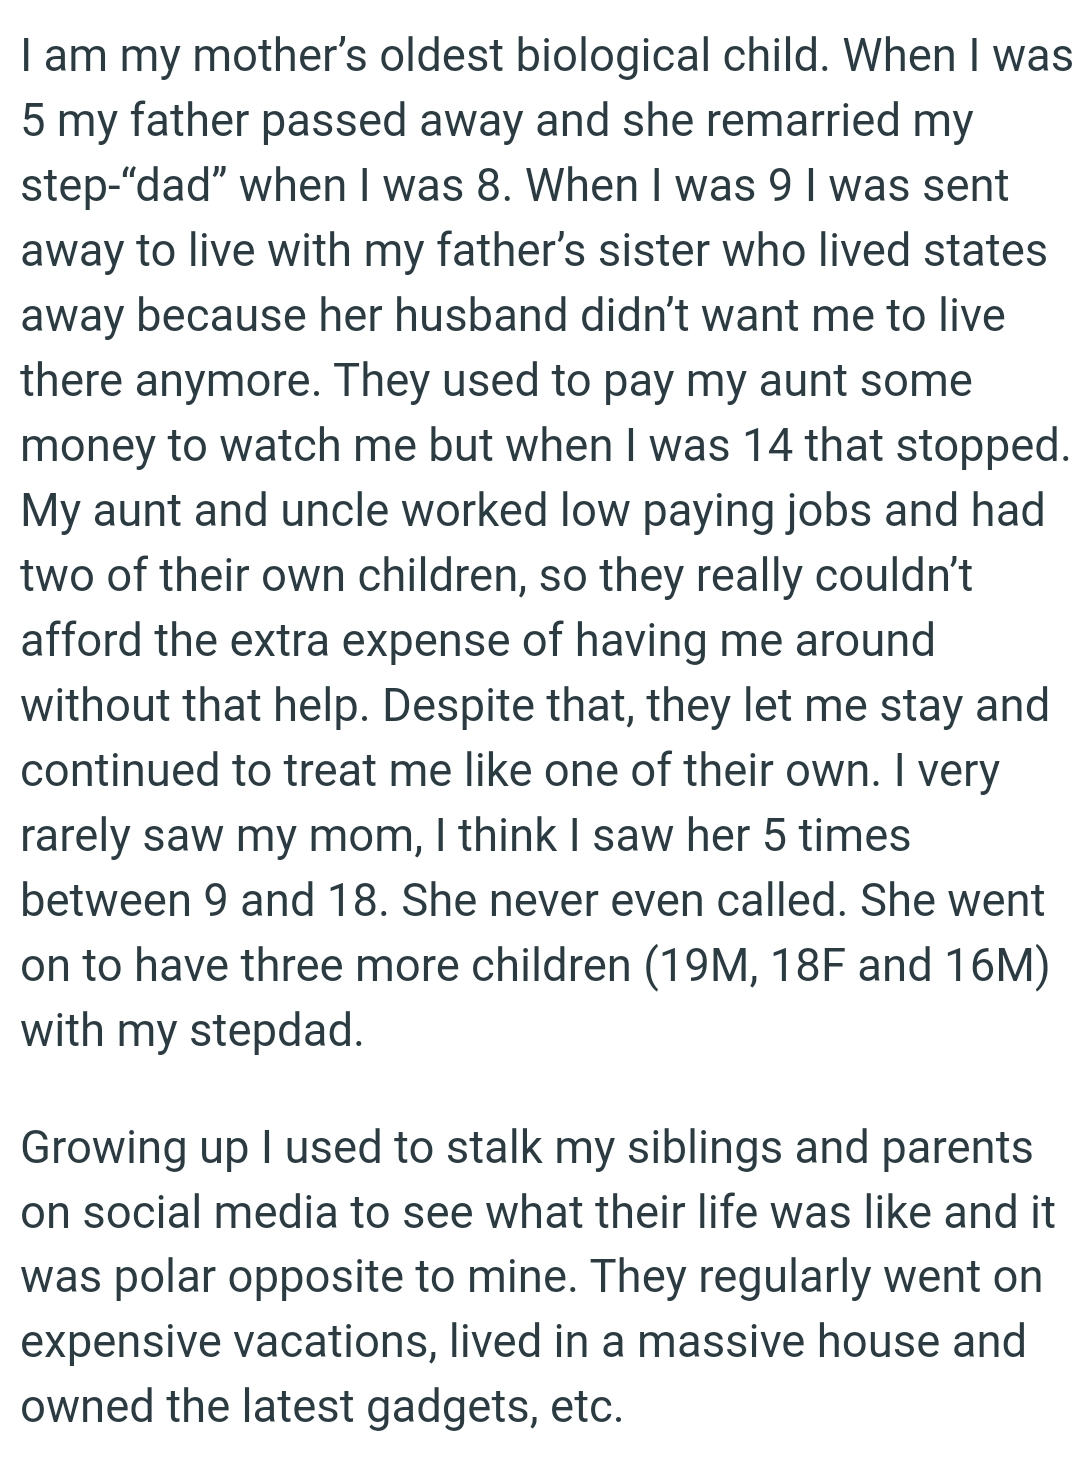 They used to pay OP's aunt some money to watch her but when she was 14, that stopped